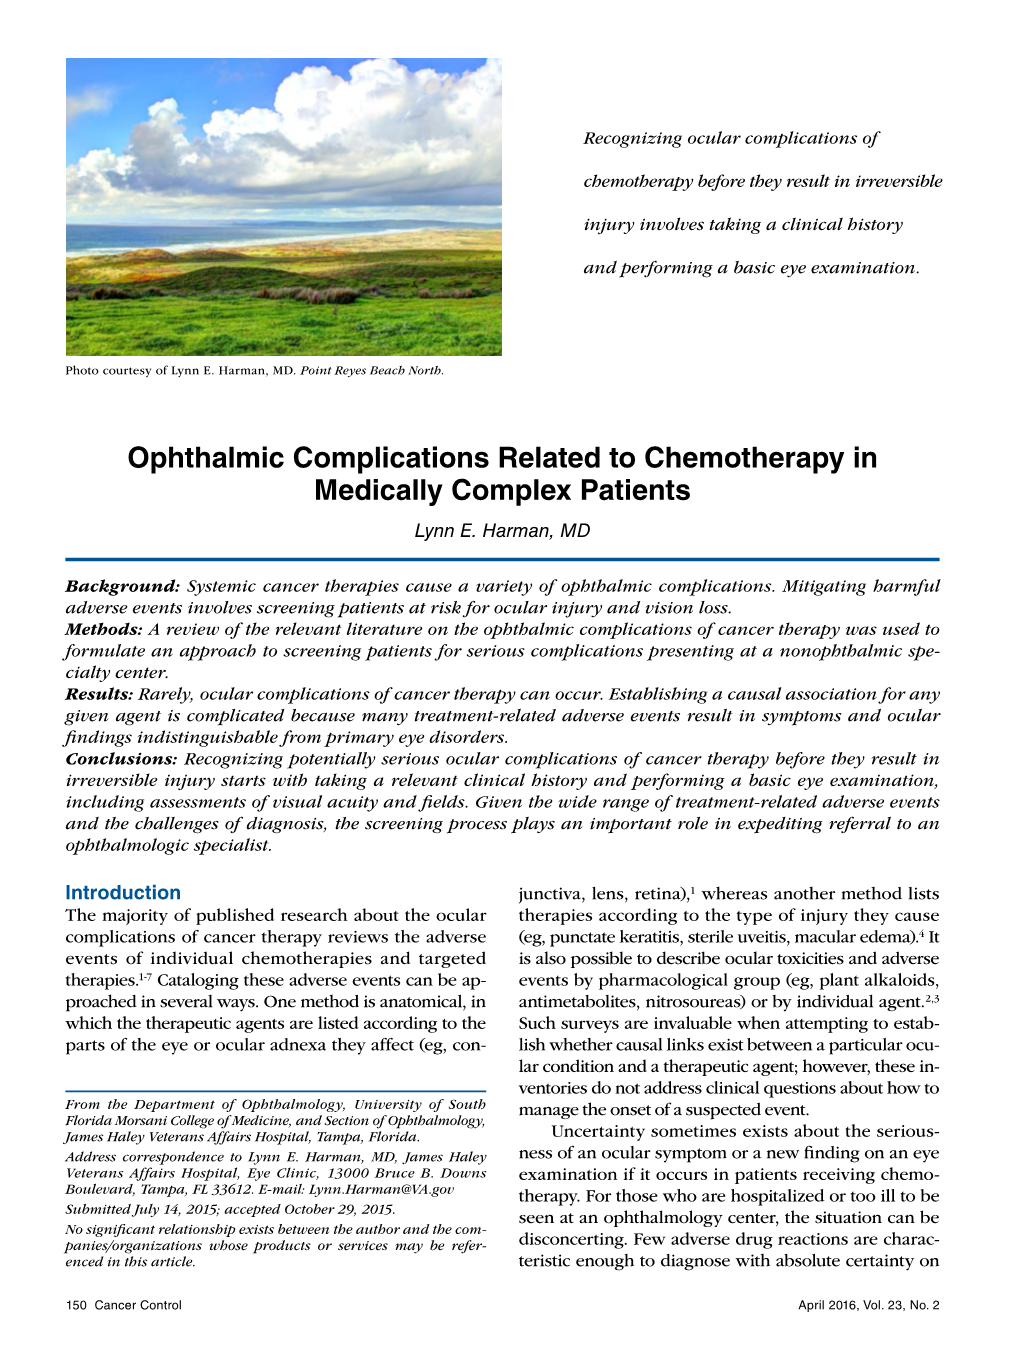 Ophthalmic Complications Related to Chemotherapy in Medically Complex Patients Lynn E